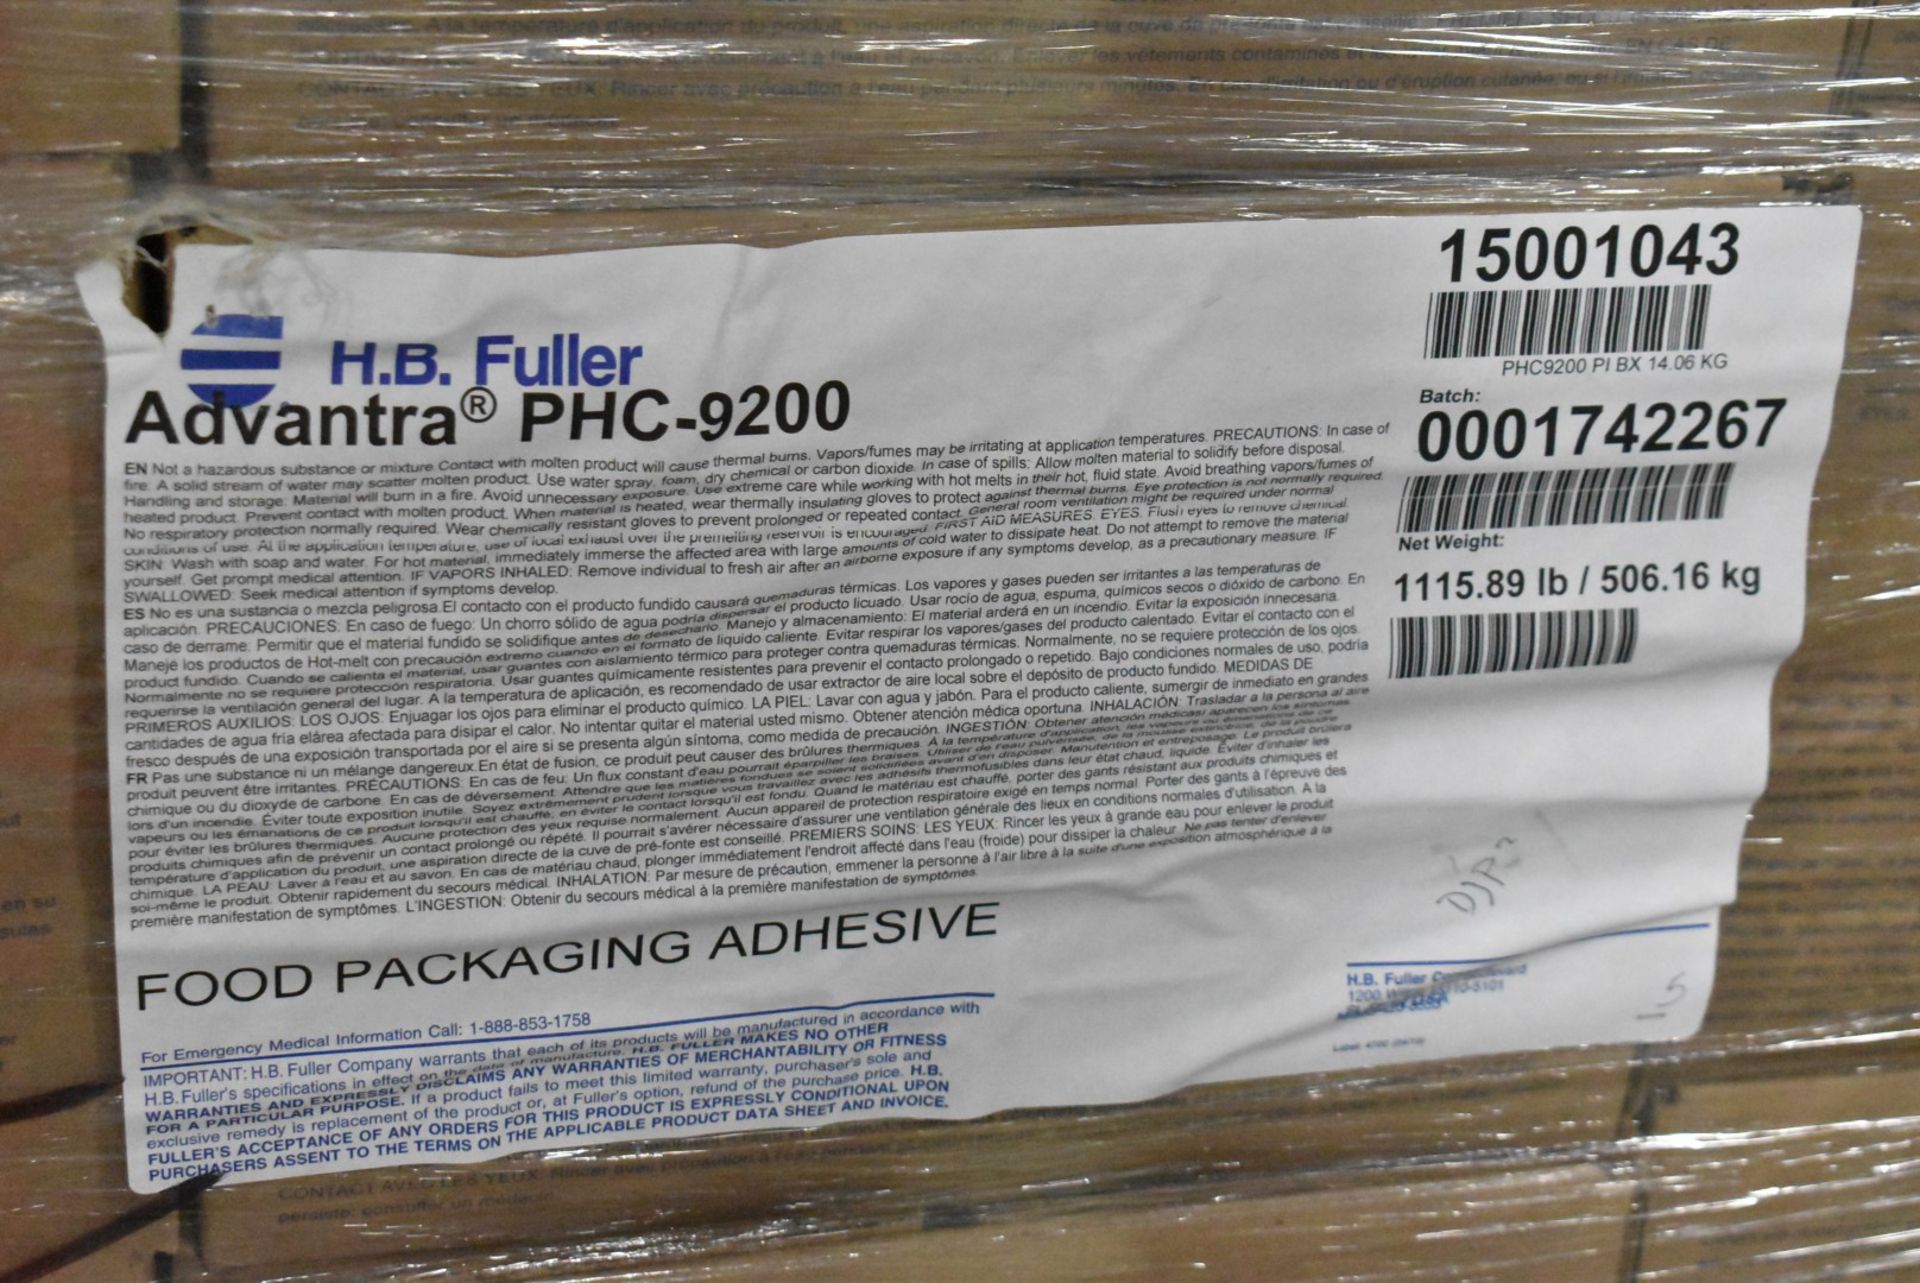 LOT/ PALLET OF ADVANTRA PHC-9200 FOOD PACKAGING ADHESIVE [RIGGING FEE FOR LOT #876 - $25 USD PLUS - Image 2 of 2